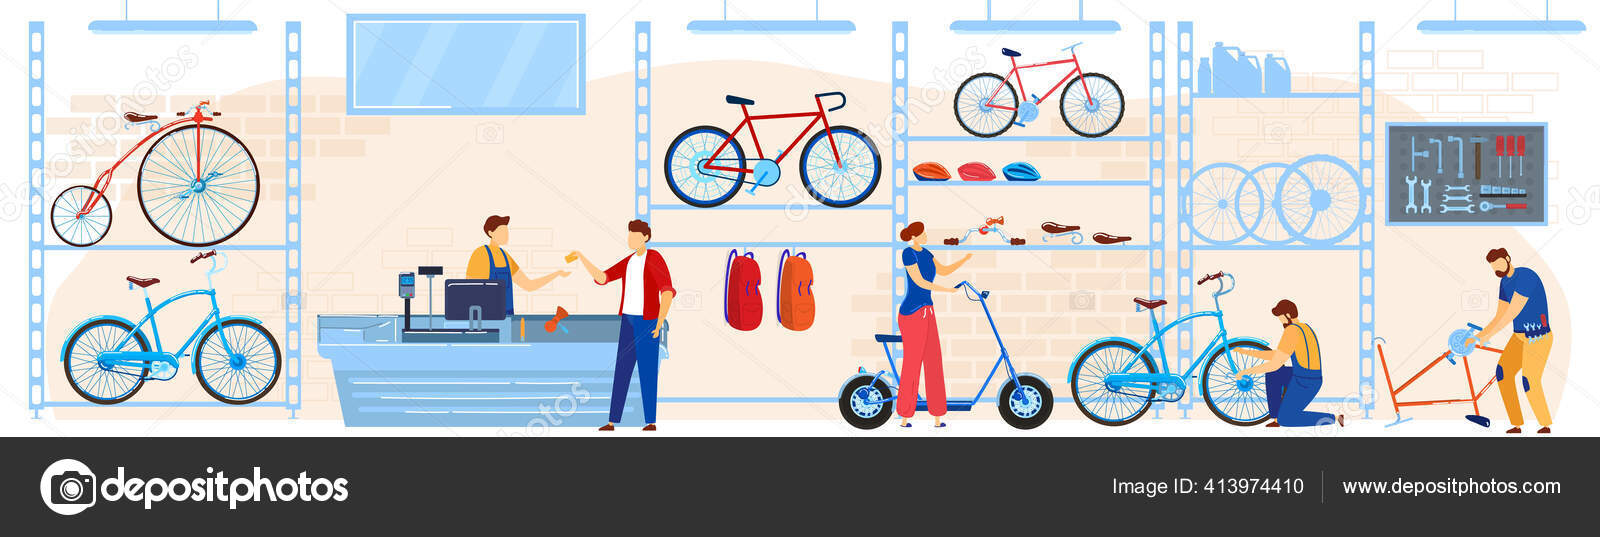 Bicycle bike store vector illustration, cartoon flat buyers shoppers people choosing cycles, accessories or equipment at bike shop Stock Vector by ©seahorsevector 413974410